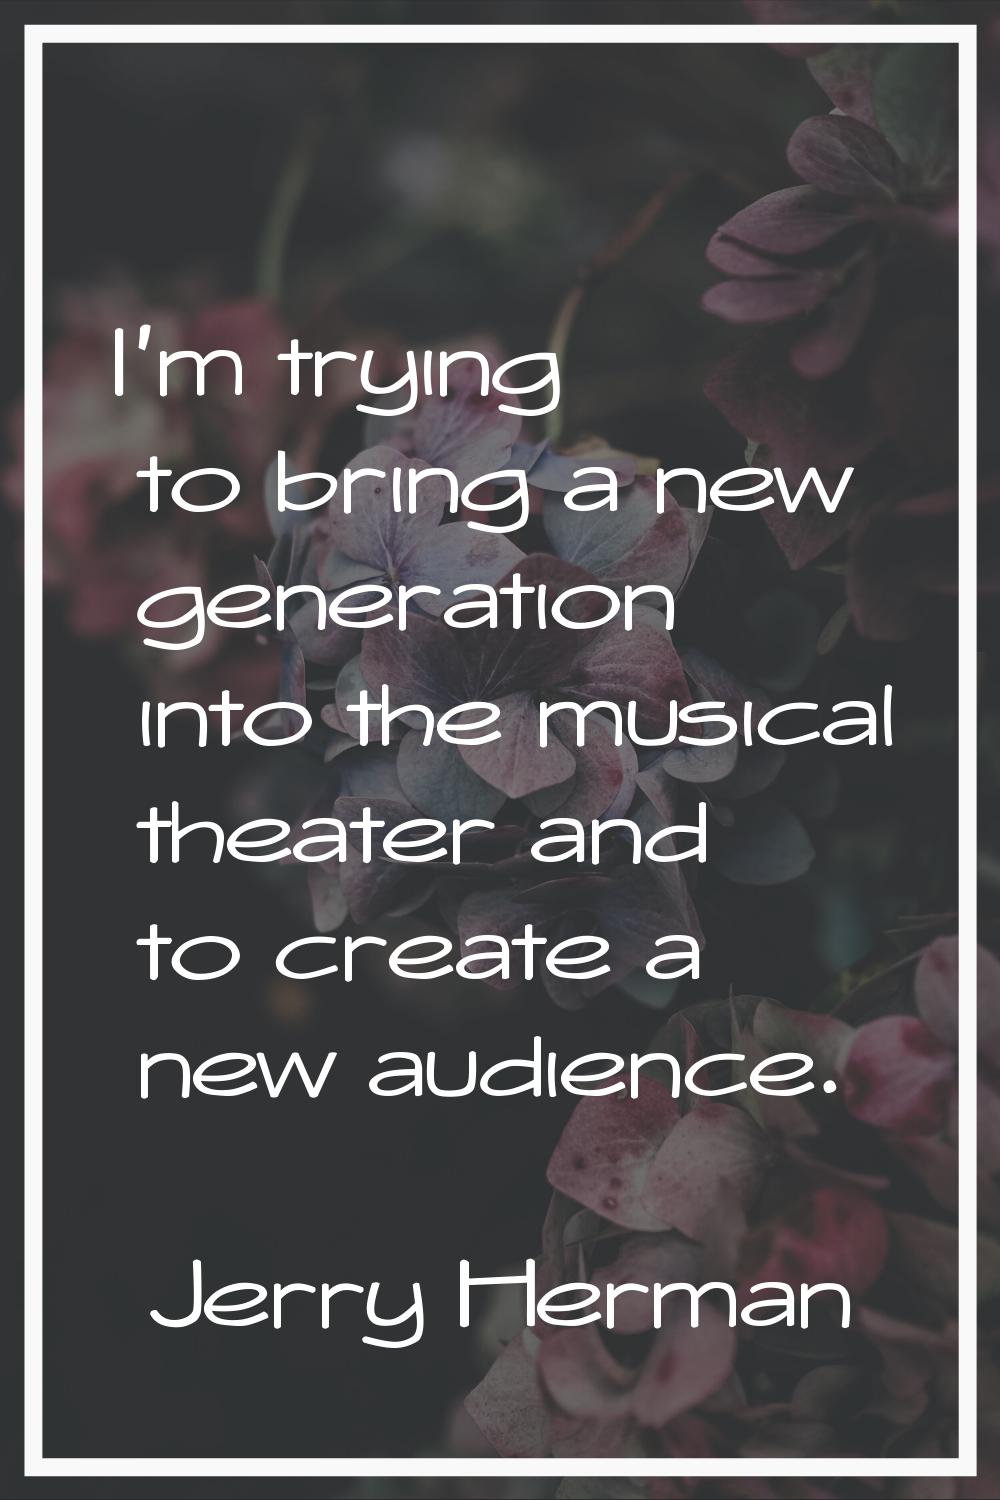 I'm trying to bring a new generation into the musical theater and to create a new audience.